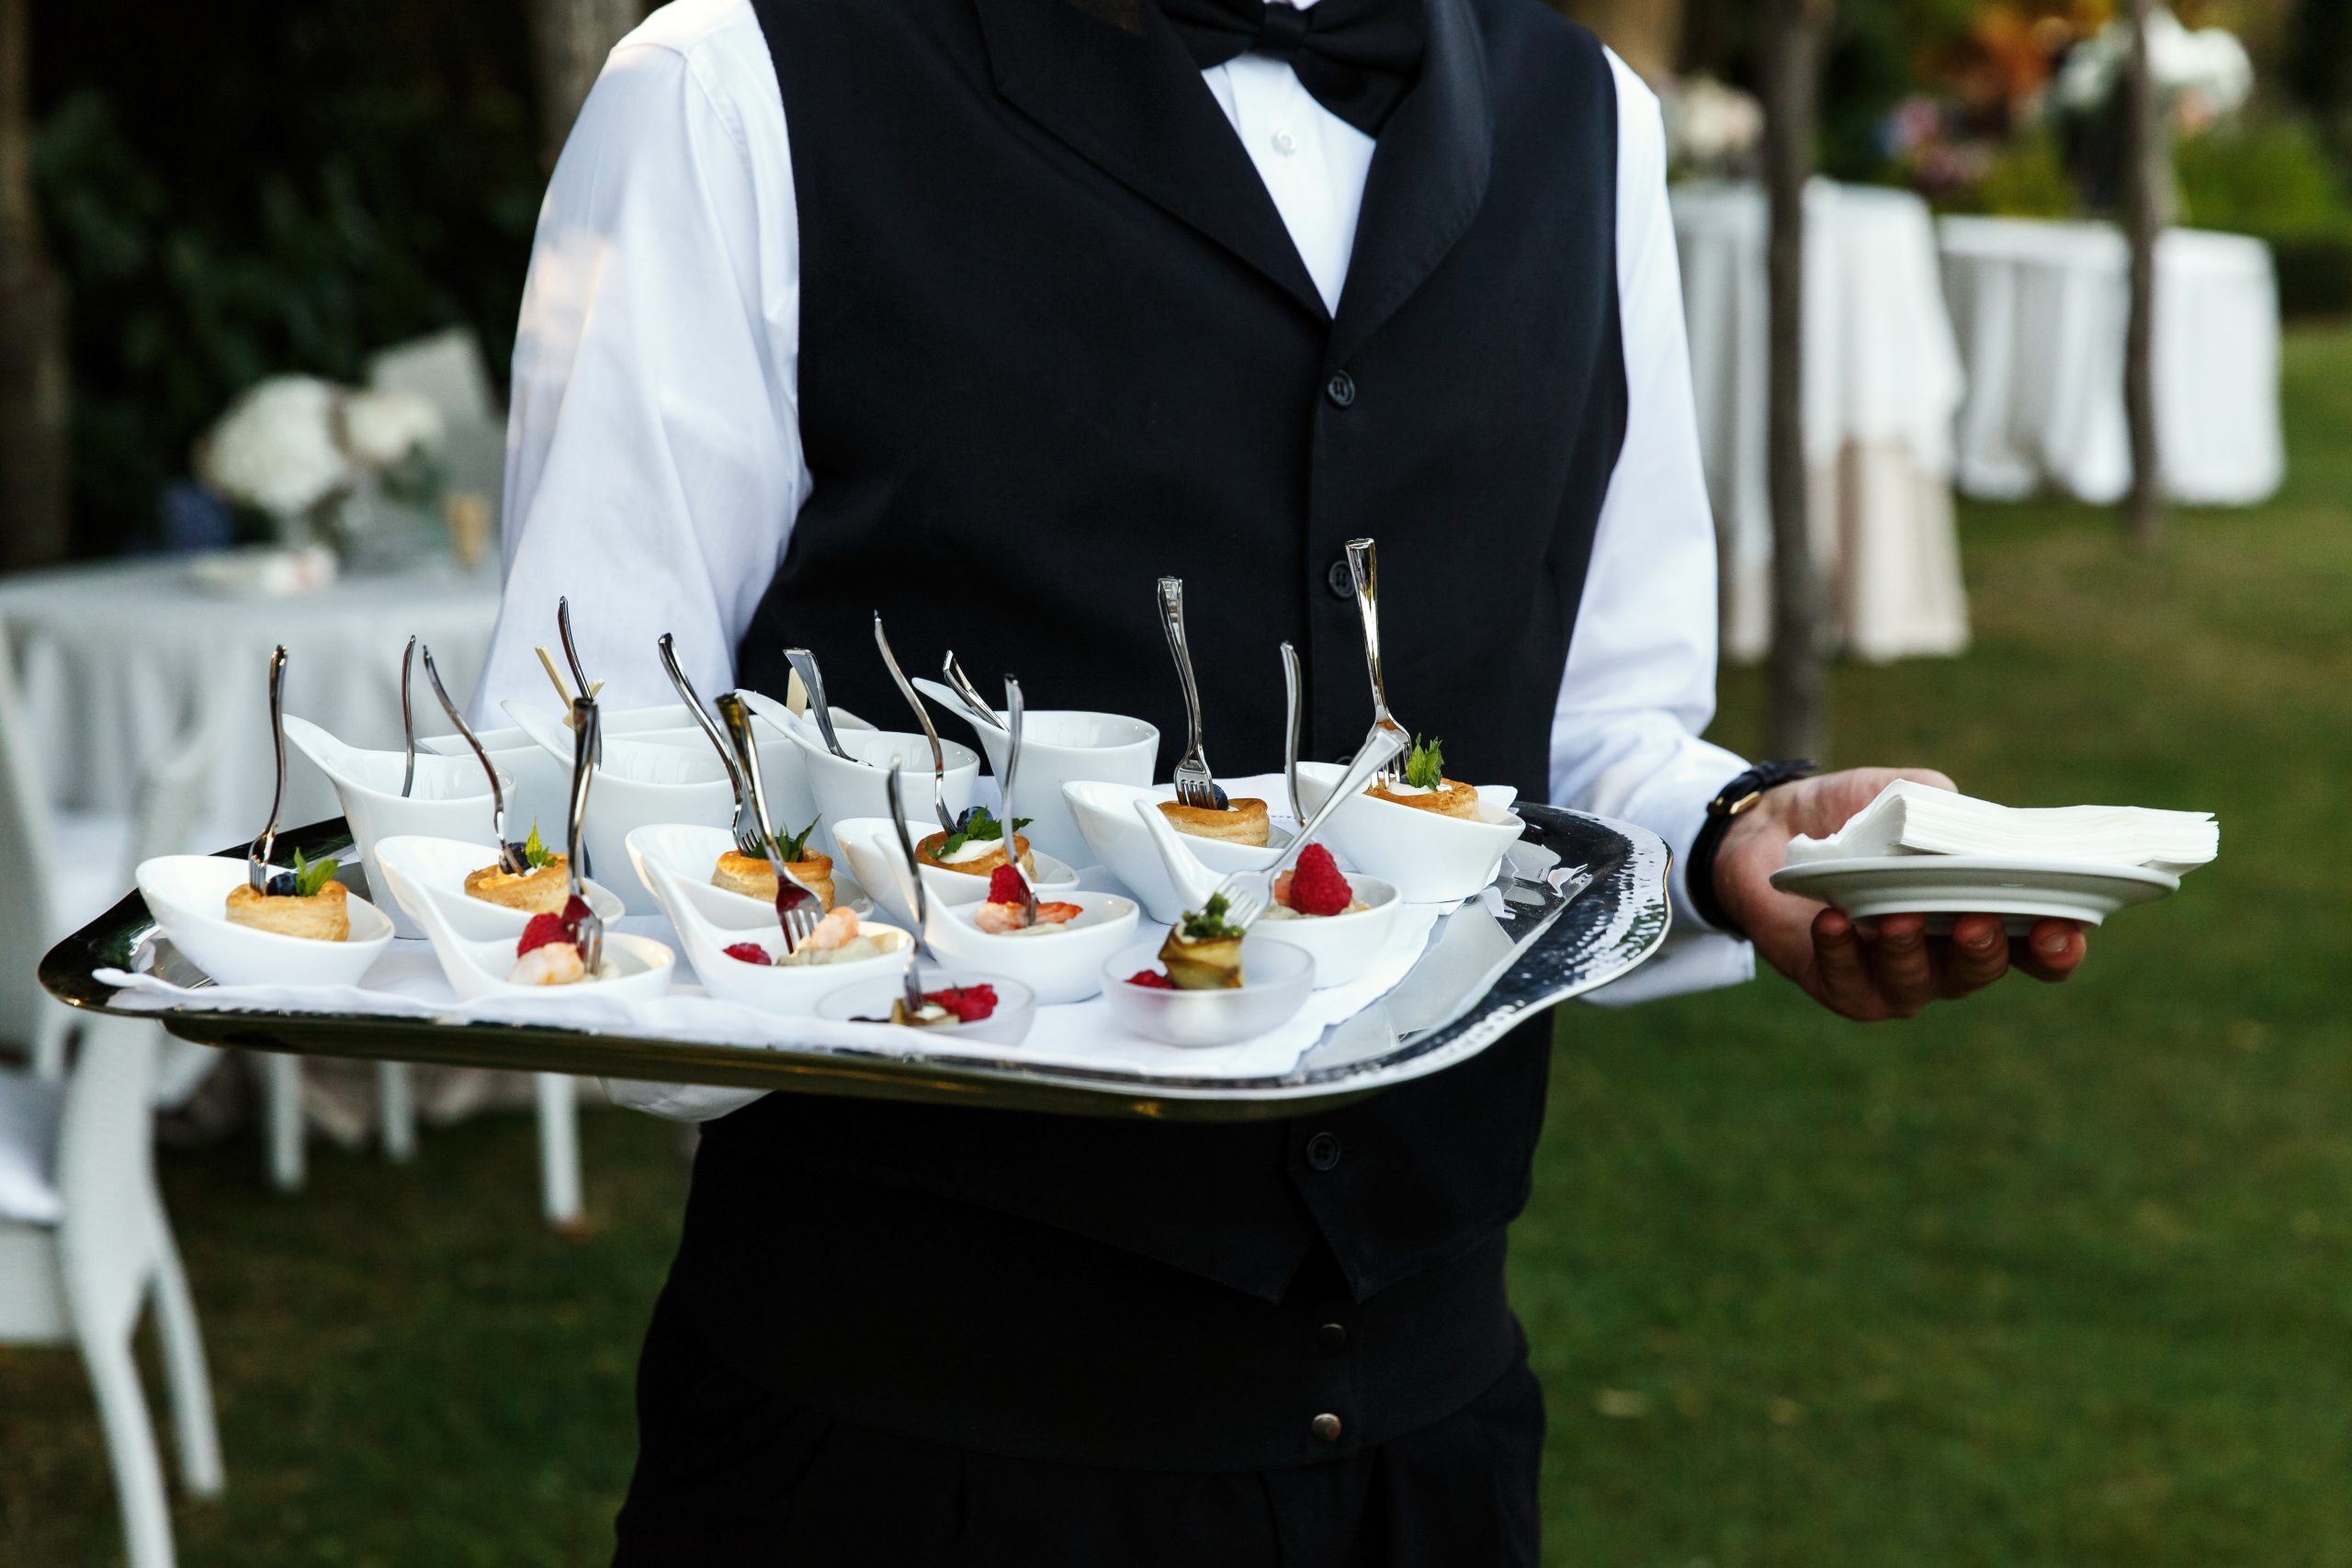 Waiter carries plate with tasty snacks